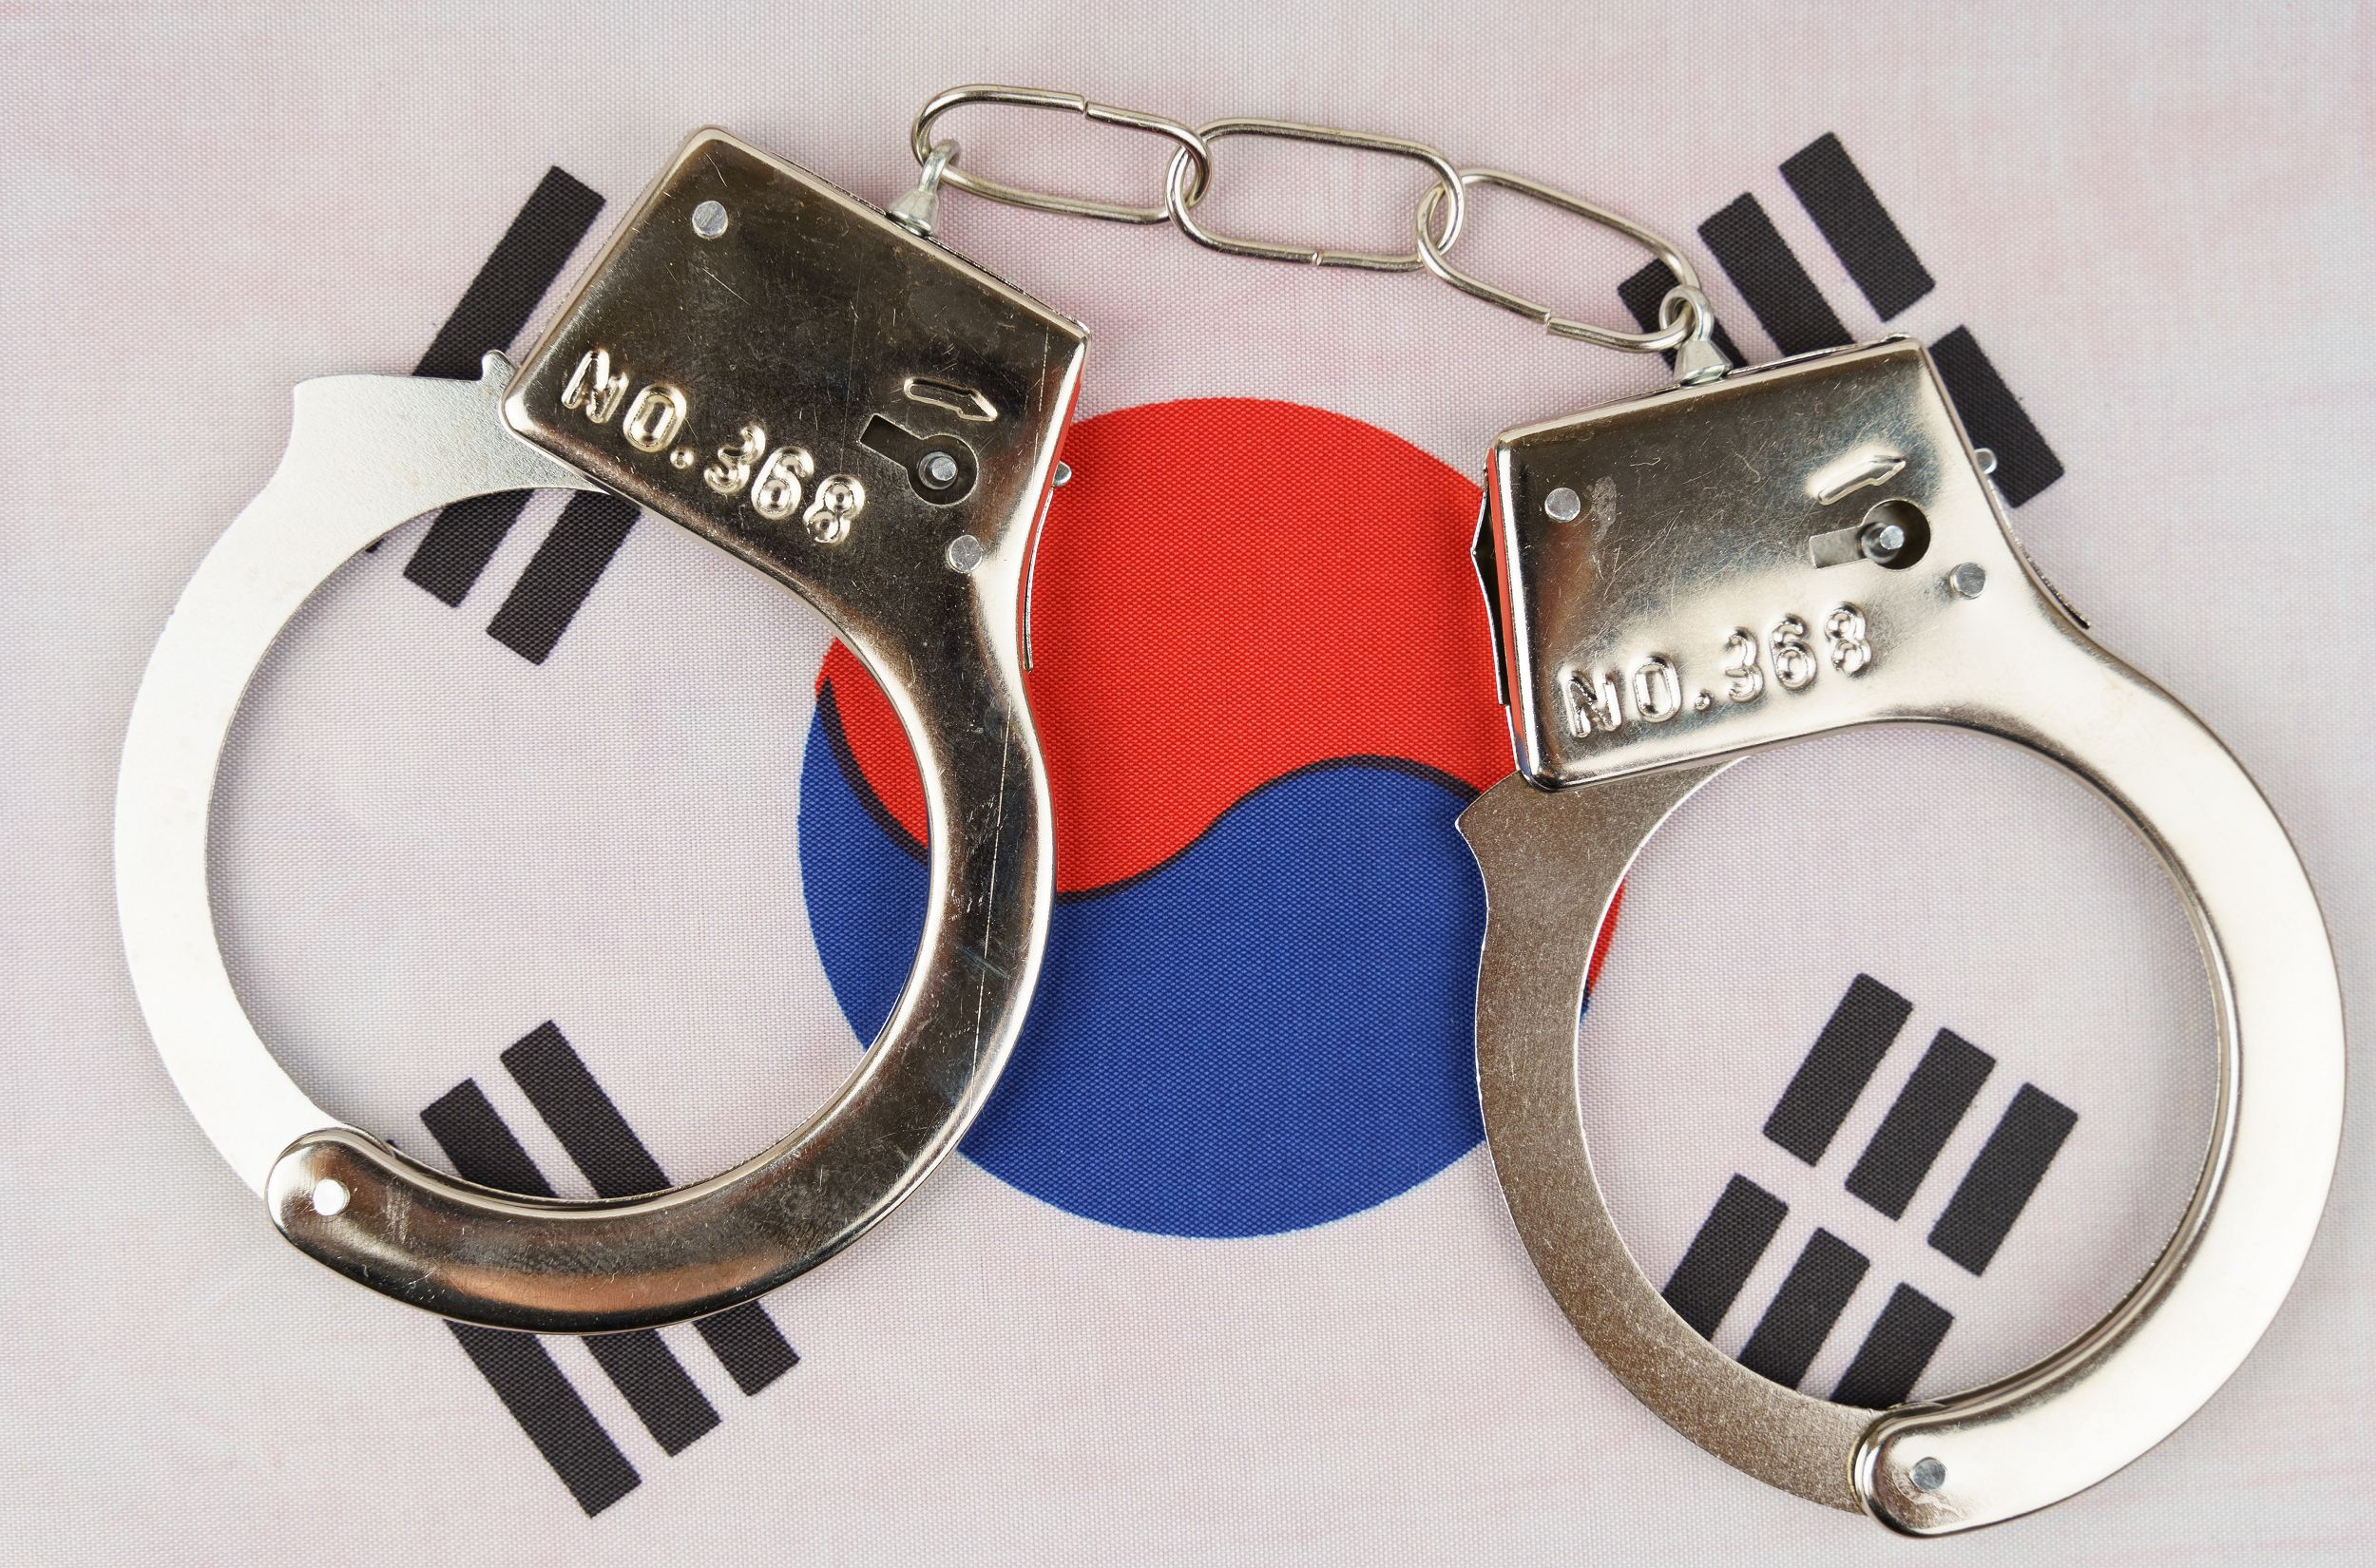 A pair of handcuffs rests on the flag of South Korea.